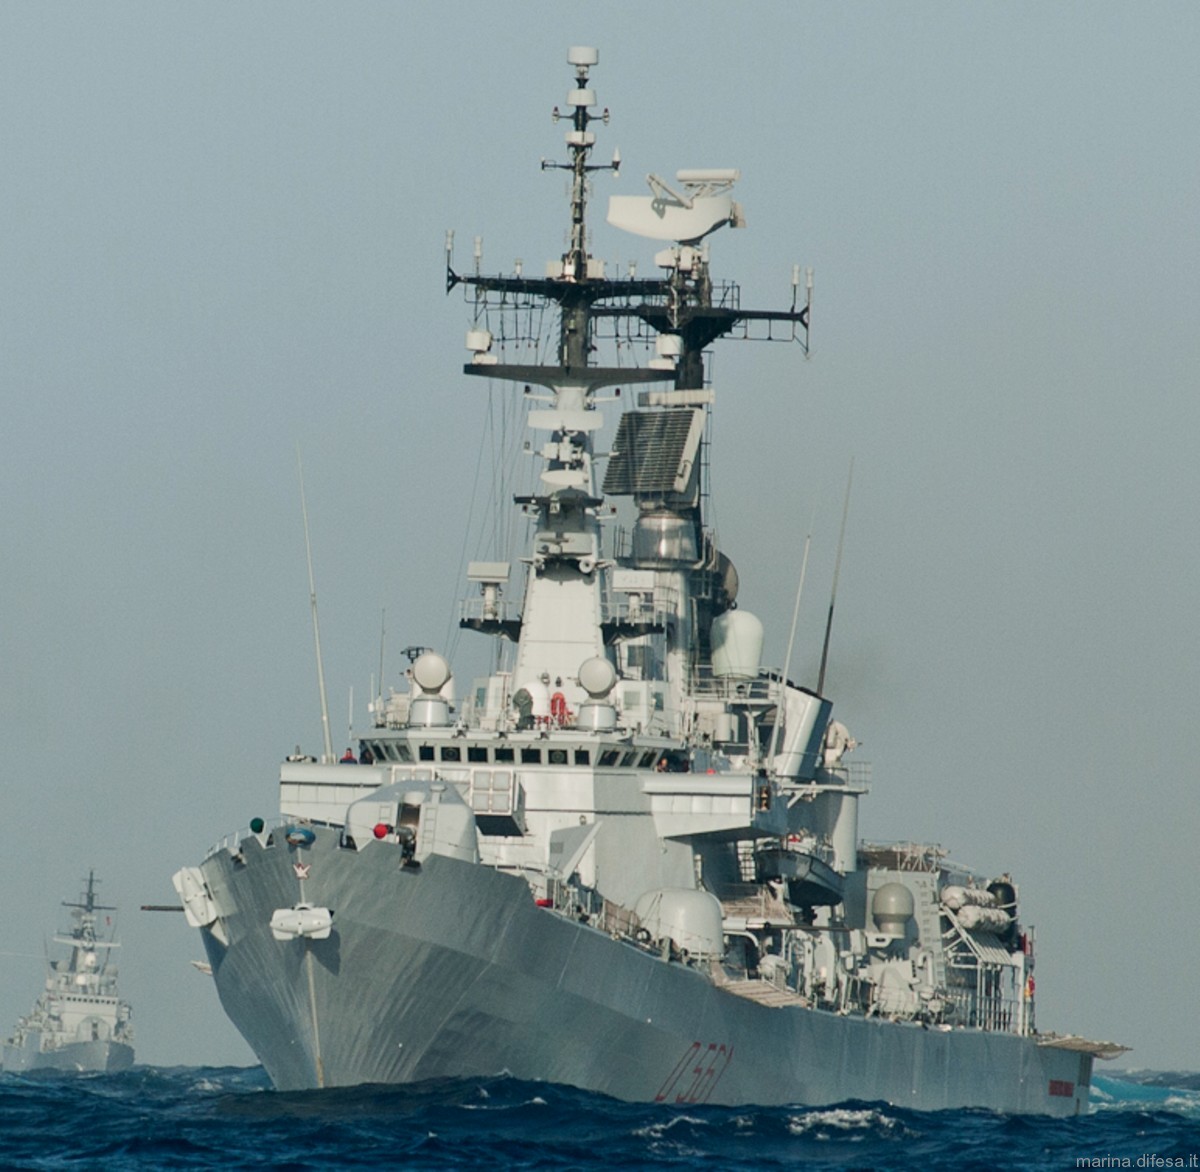 d-561 francesco mimbelli its nave guided missile destroyer ddg italian navy marina militare 14